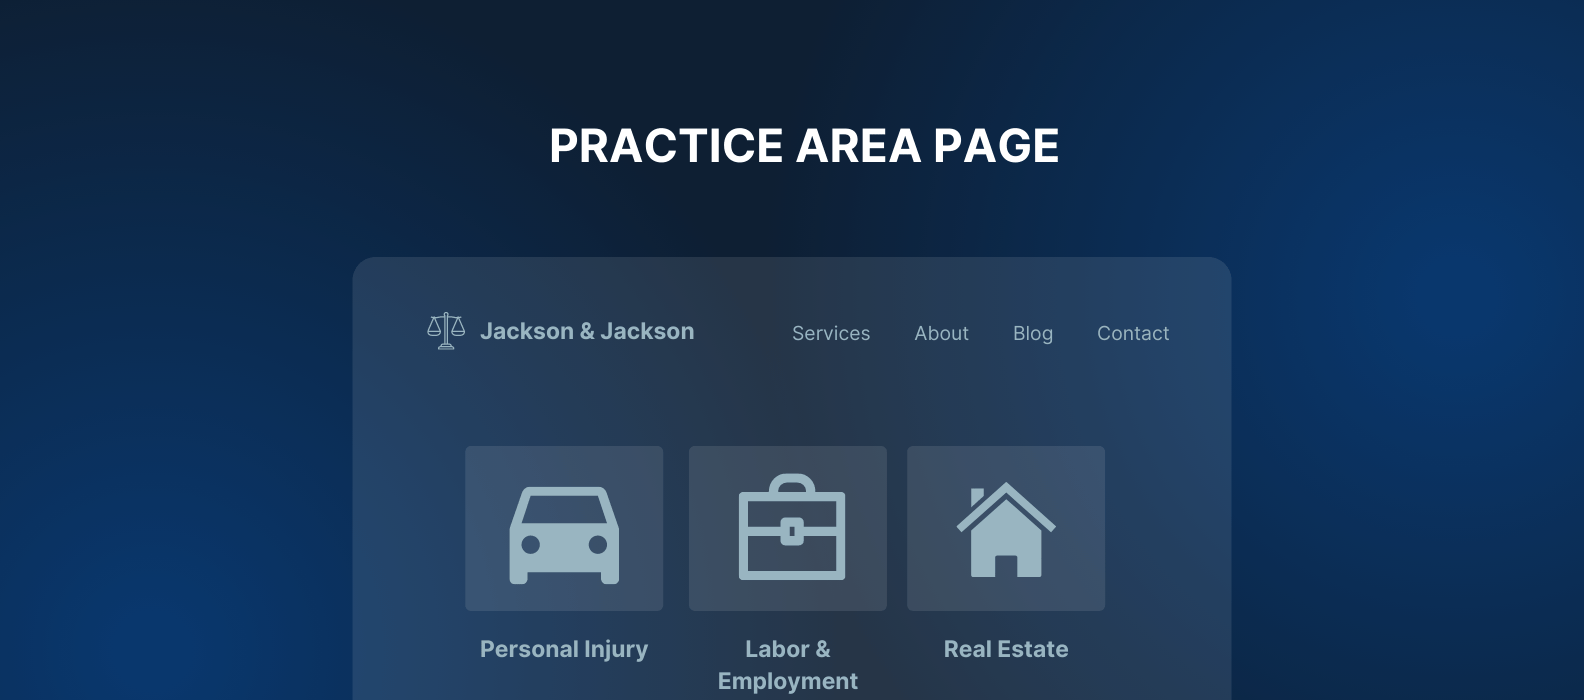 Practice Area Page